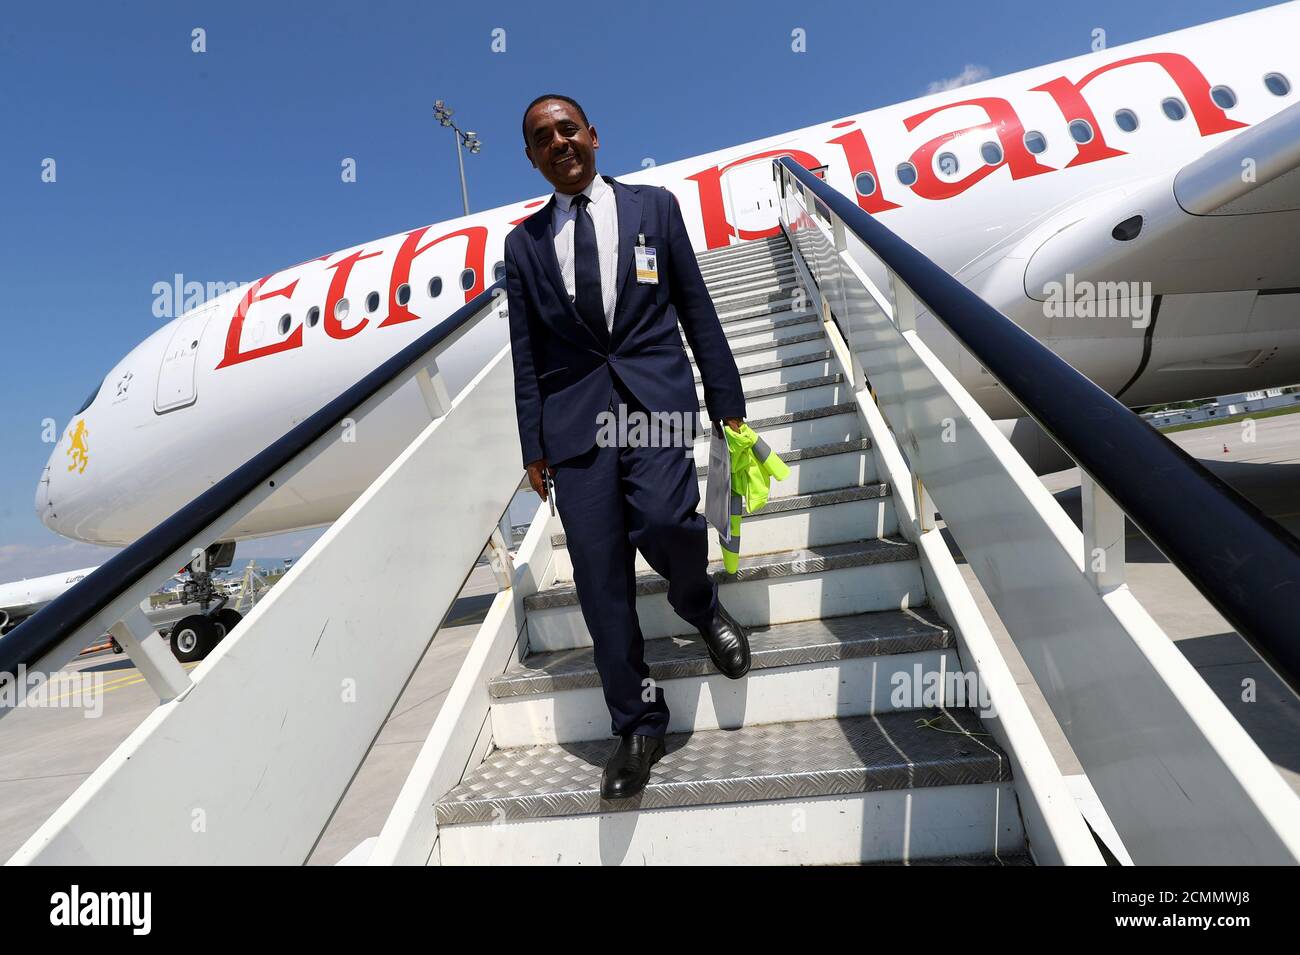 Thomas Gabreyohannes, Director for Germany and Central Europe of Ethiopian Airlines walks down the gangway of an Airbus A350-900 during a site-inspection at Fraport airport in Frankfurt, Germany, May 22, 2017.  REUTERS/Kai Pfaffenbach Stock Photo